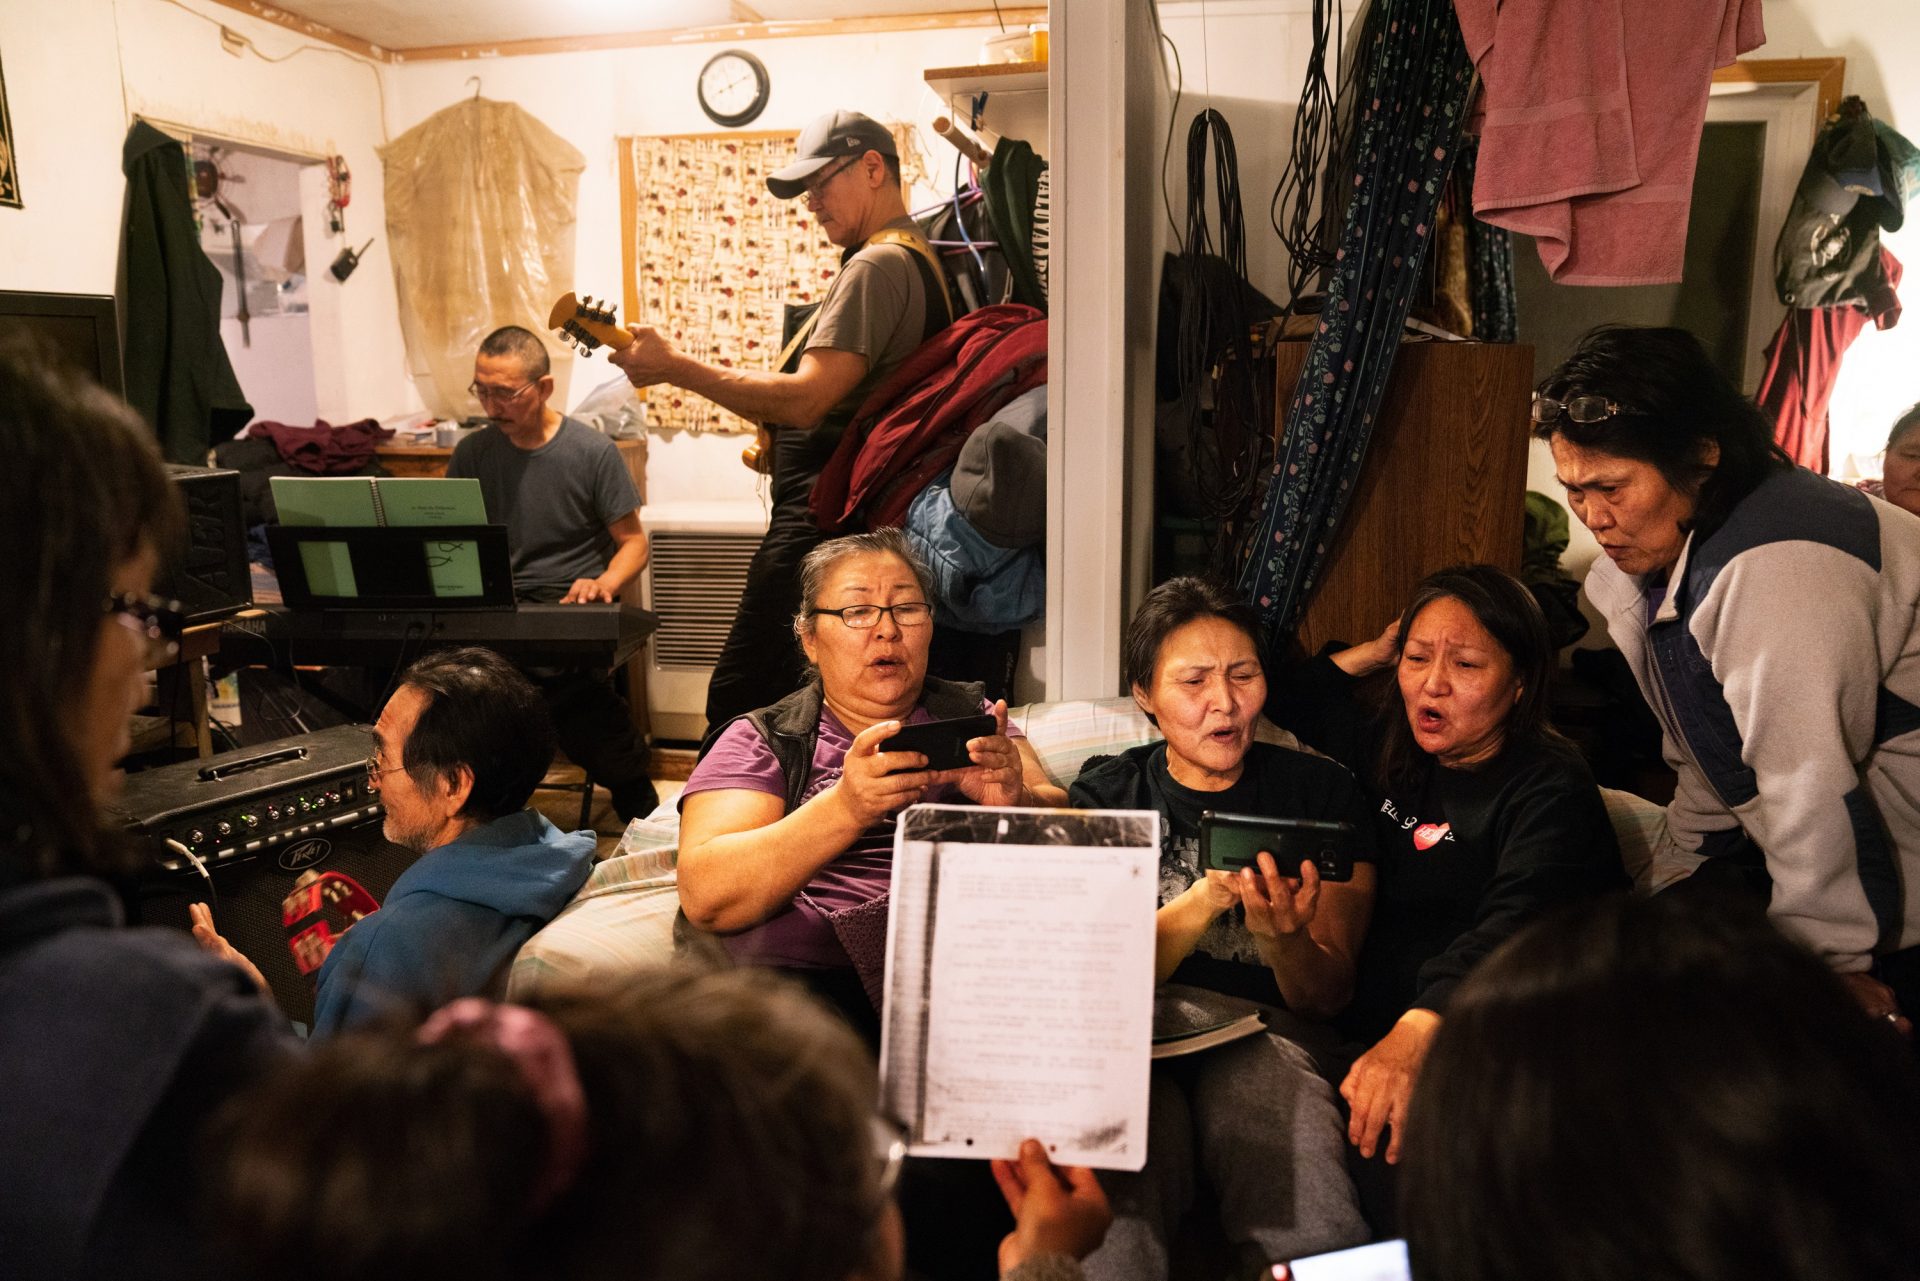 On Sunday night, people gather and practice singing hymns for George Paul Miisaq's funeral. Miisaq was living in Anchorage and his body was flown back to Toksook Bay to be buried.